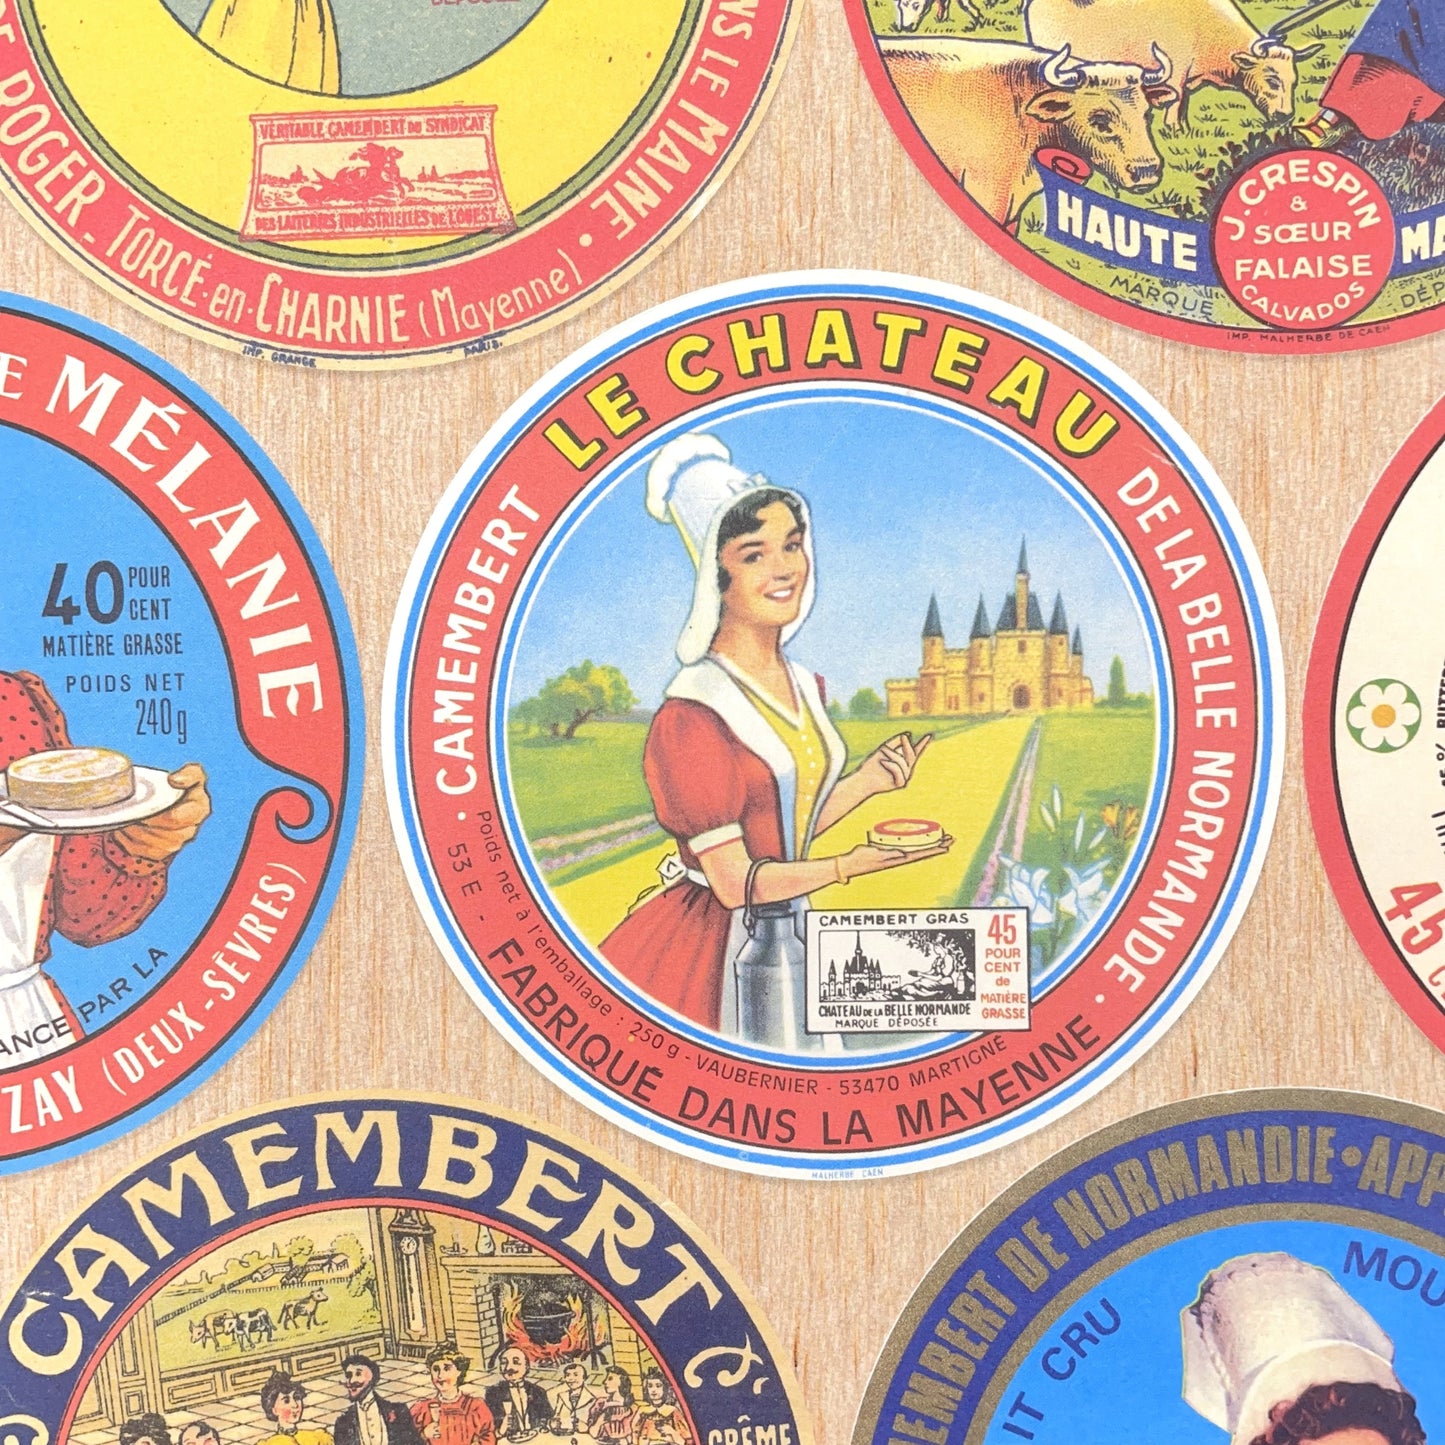 Poster wrap by The Pattern Book. this sheet of wrapping paper is covered with images of vintage camembert cheese wrappers. Detail image showing a couple of the labels